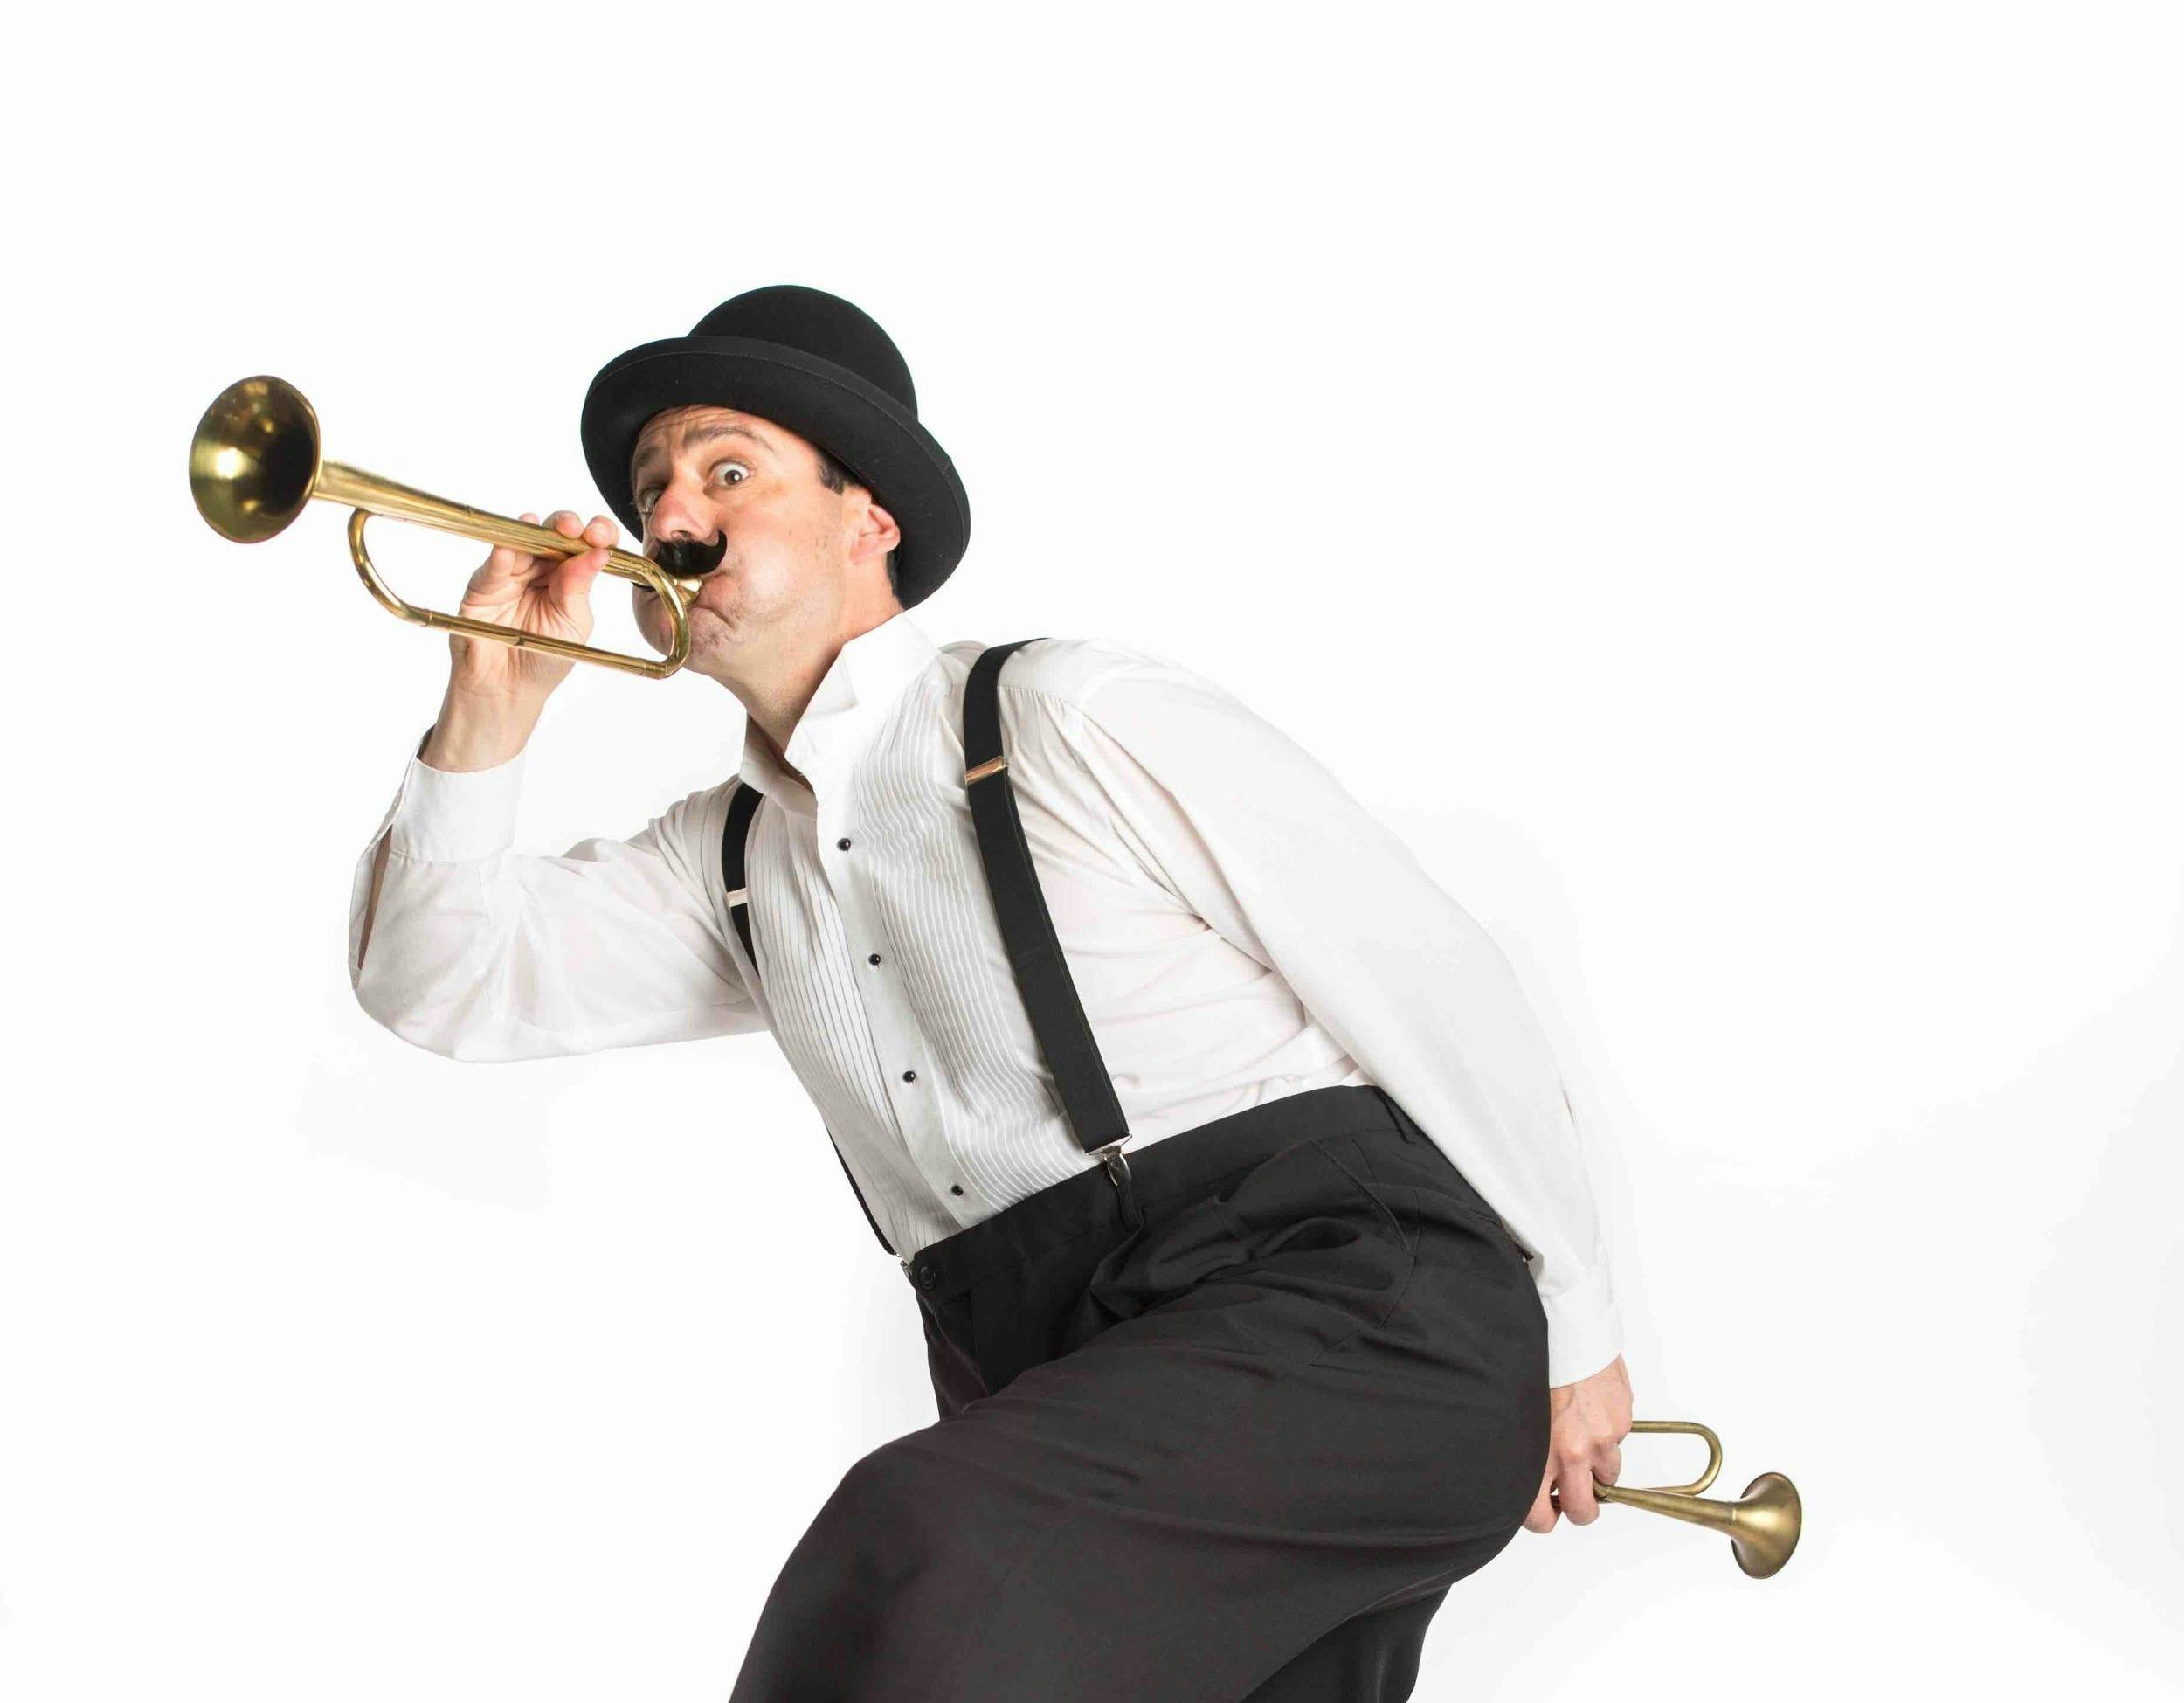 A silly image of Aytahn Ross in a white collared shirt, black suspenders, and holding two trumpets - one at his lips and one pointed away from his butt. He has a goofy expression on his face.